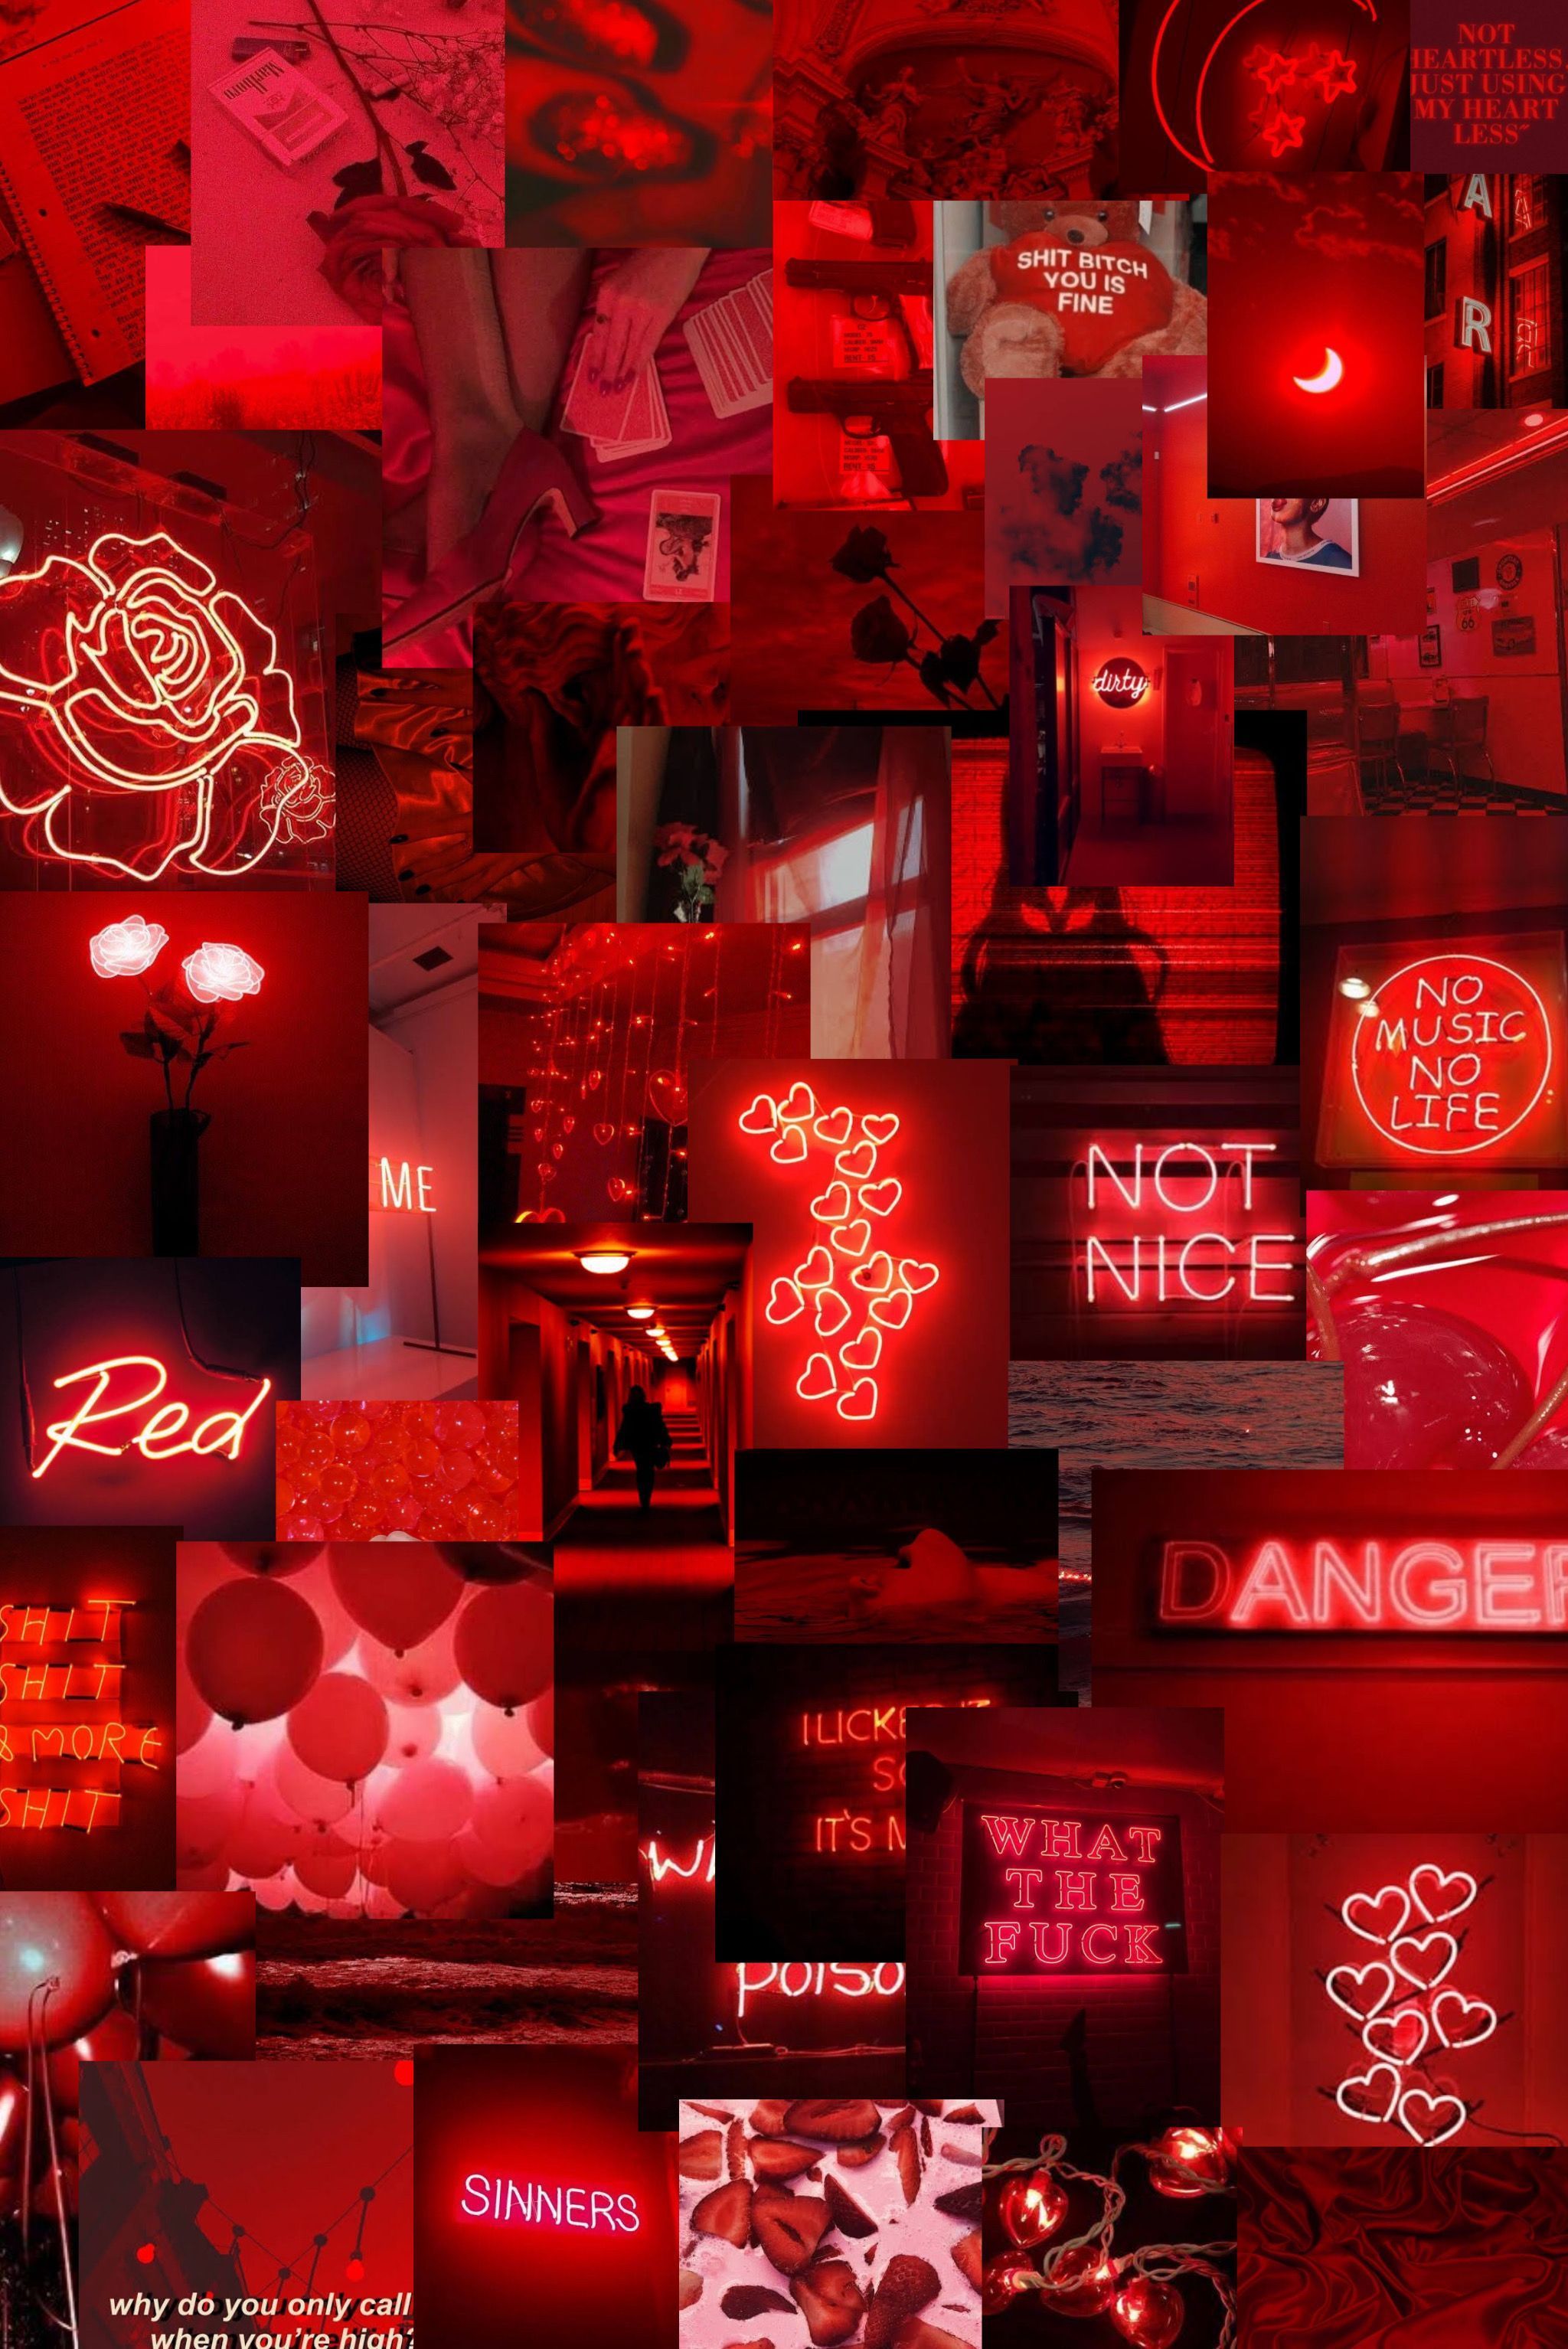 Cool Red Aesthetic Wallpaper Free Cool Red Aesthetic Background